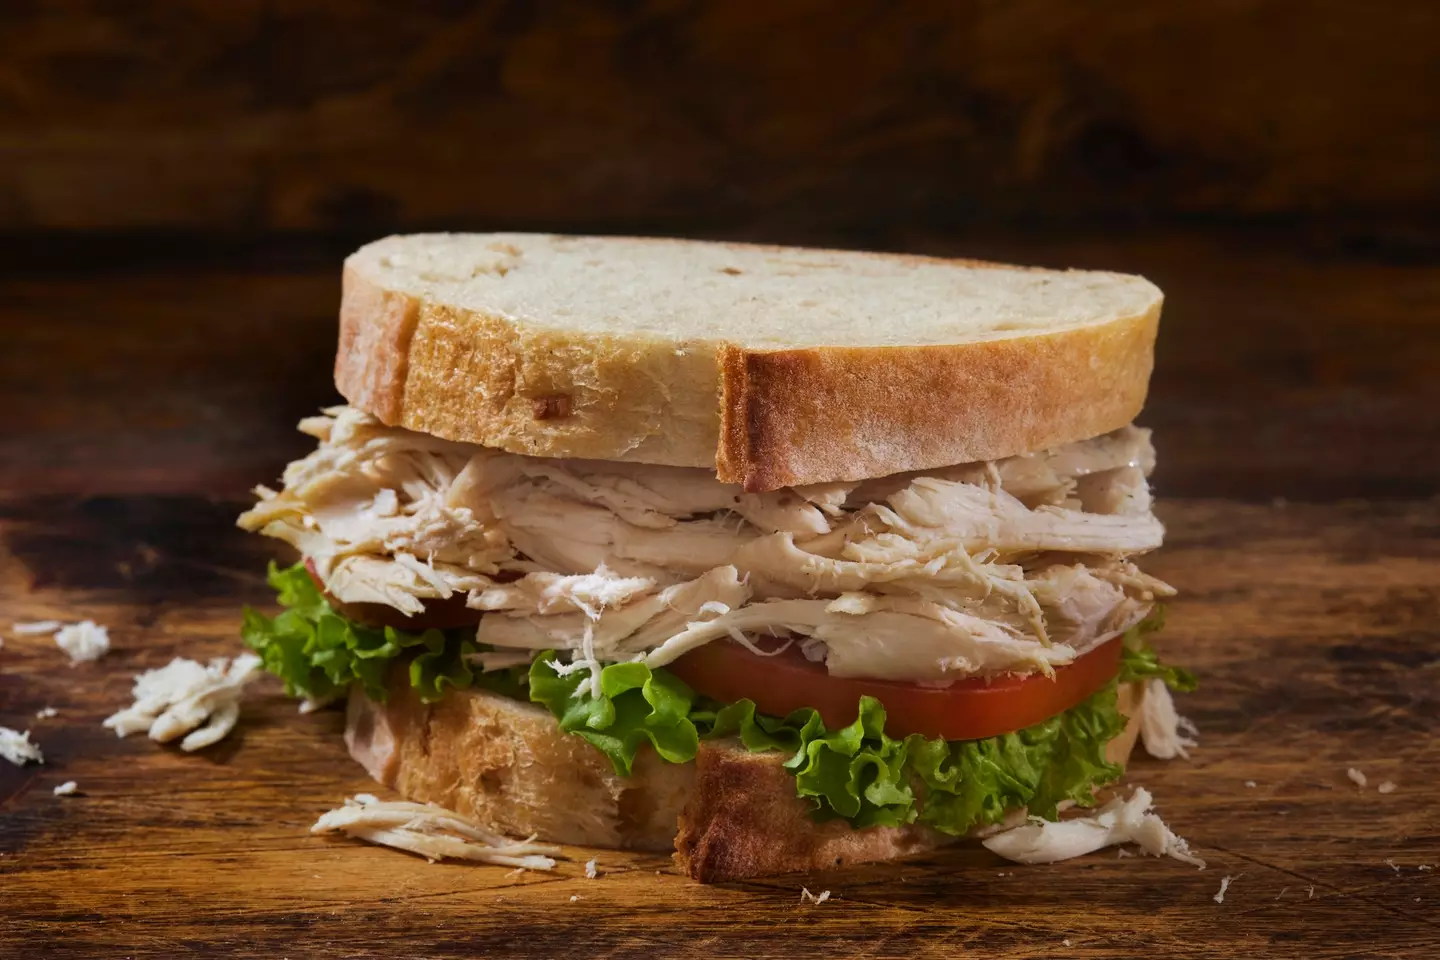 Look at the delicious sandwich you could make, but the clock is ticking.